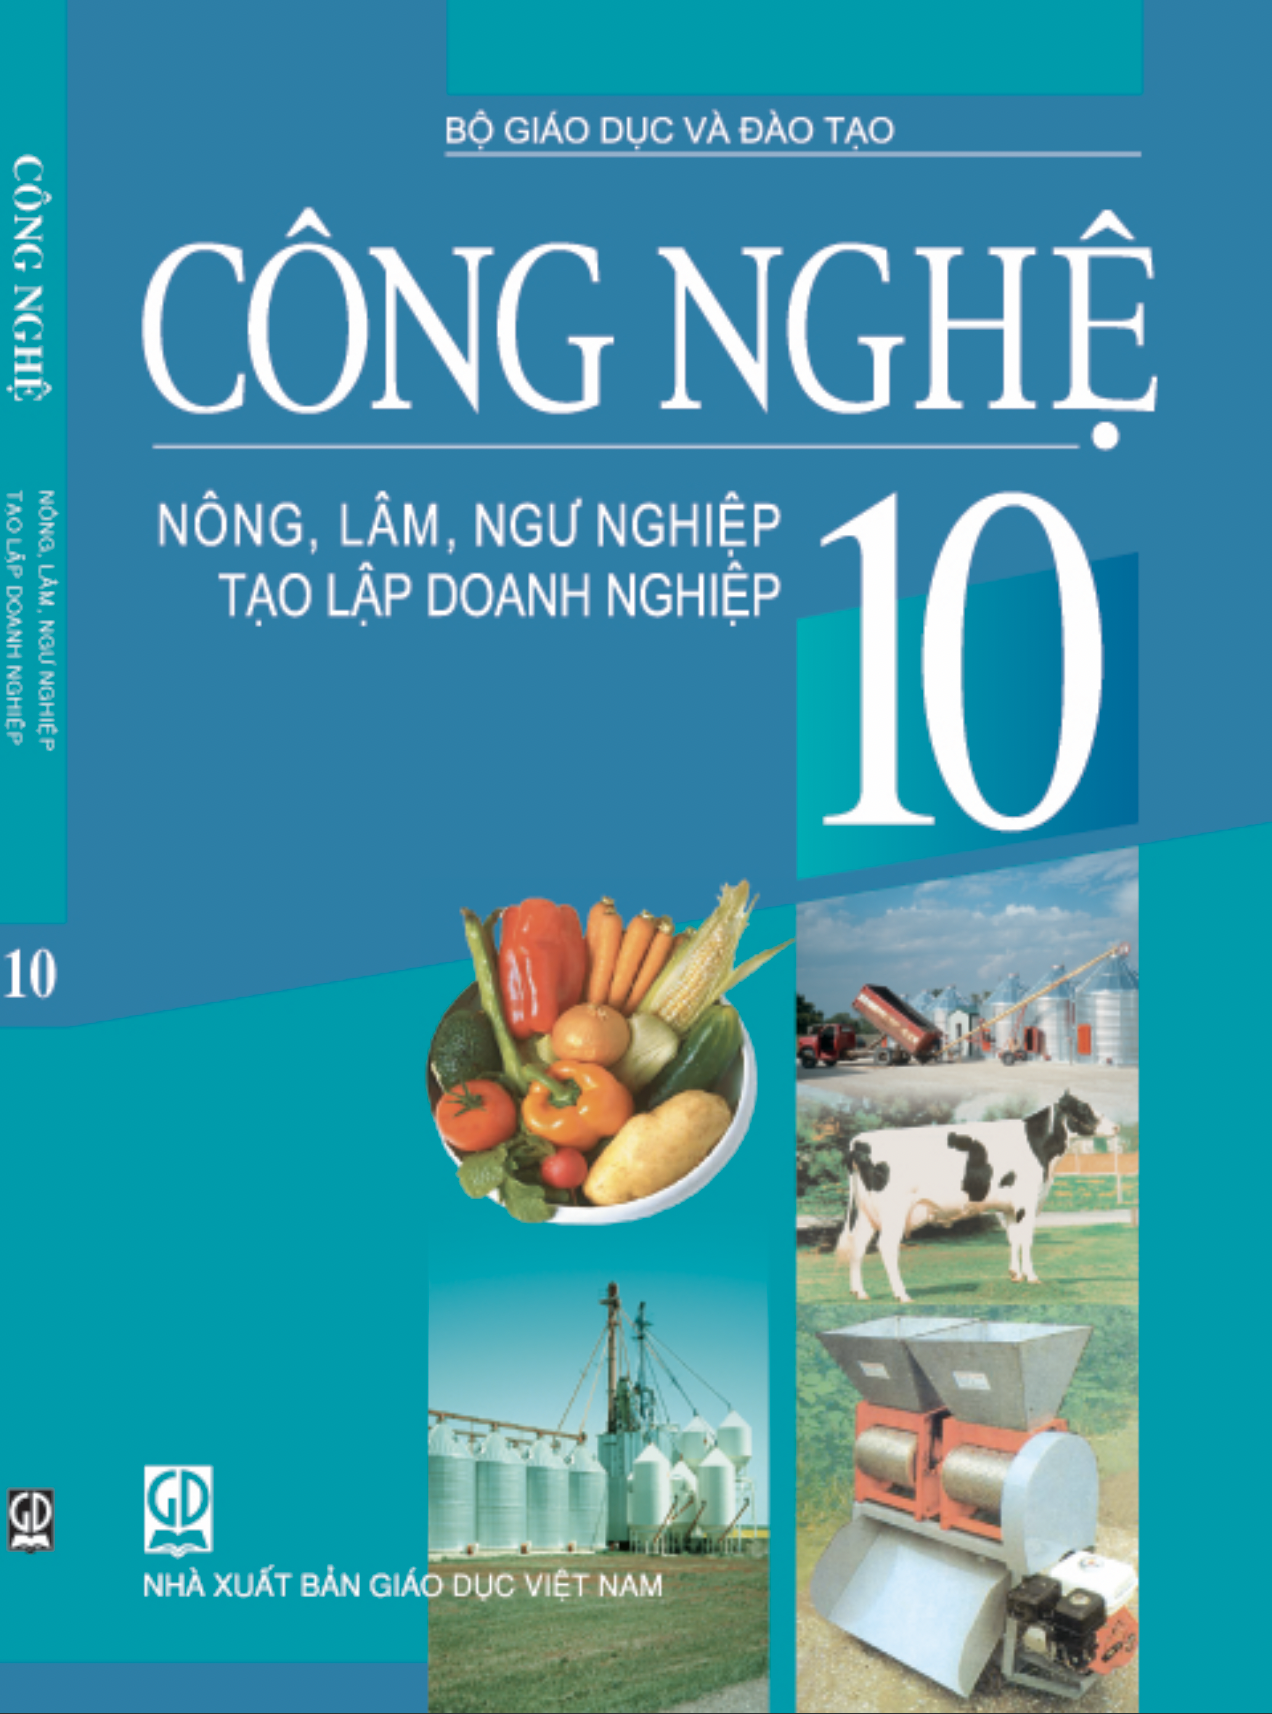 cong-nghe-824